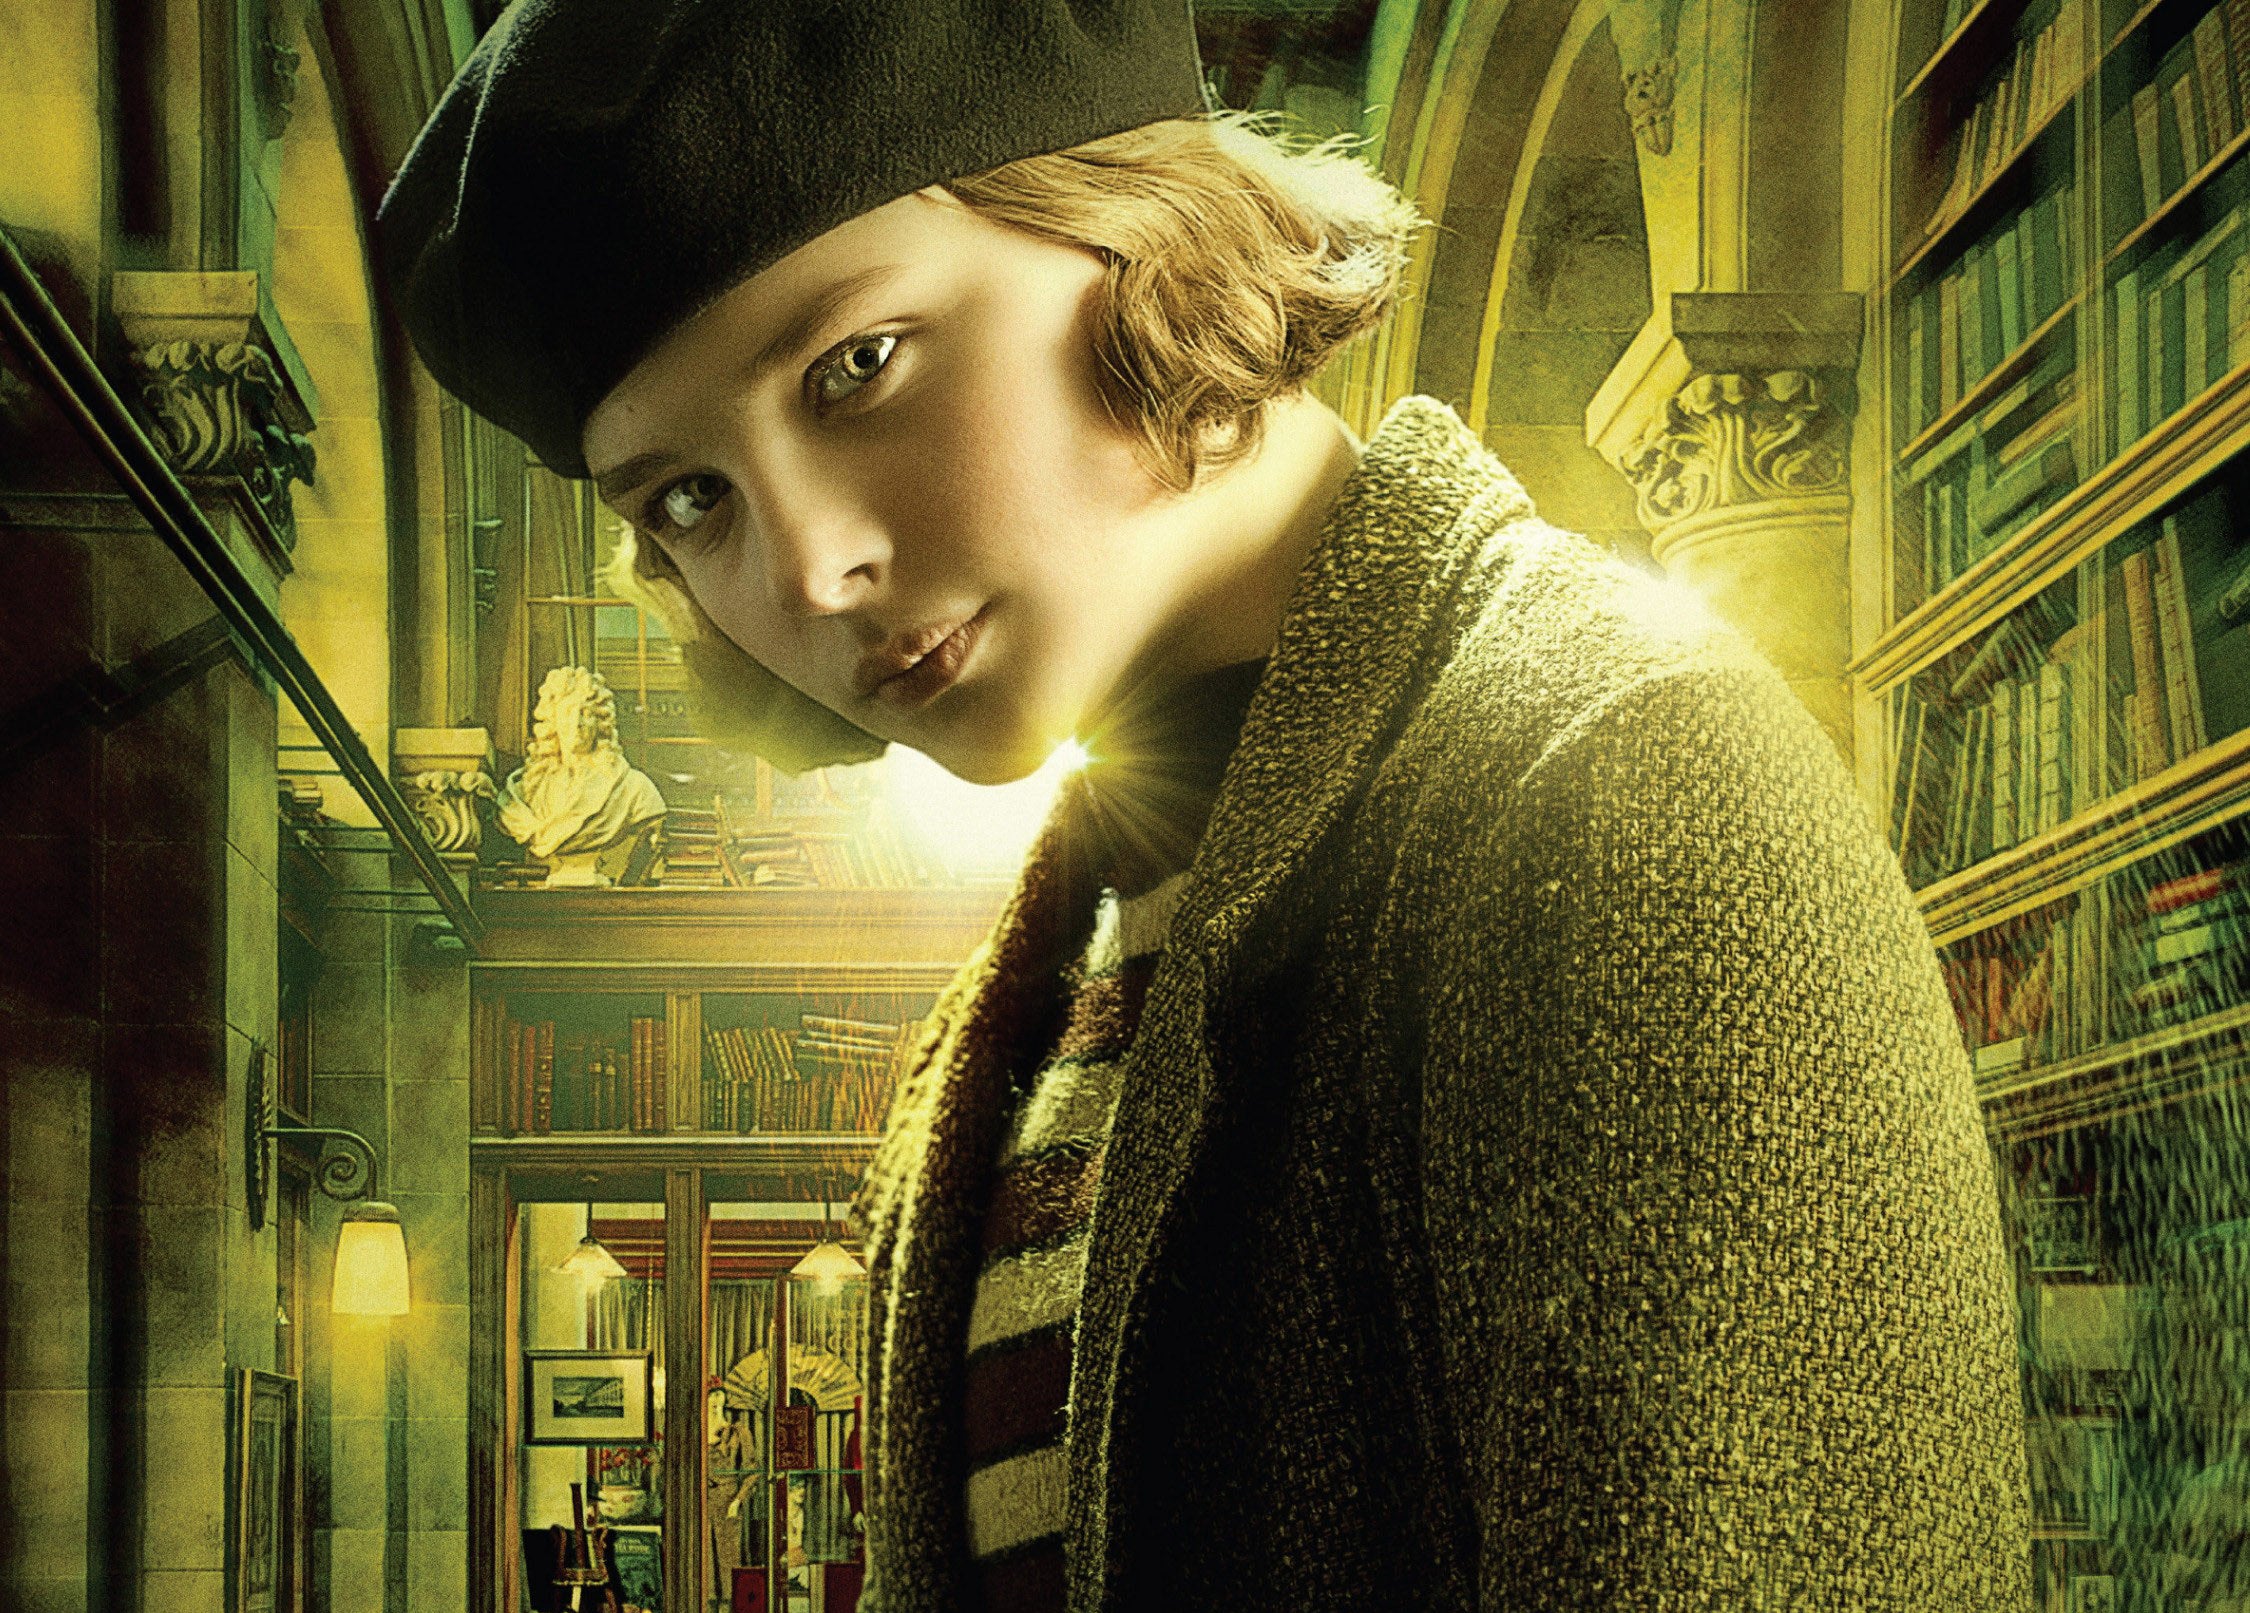 Chloë in a library in the movie